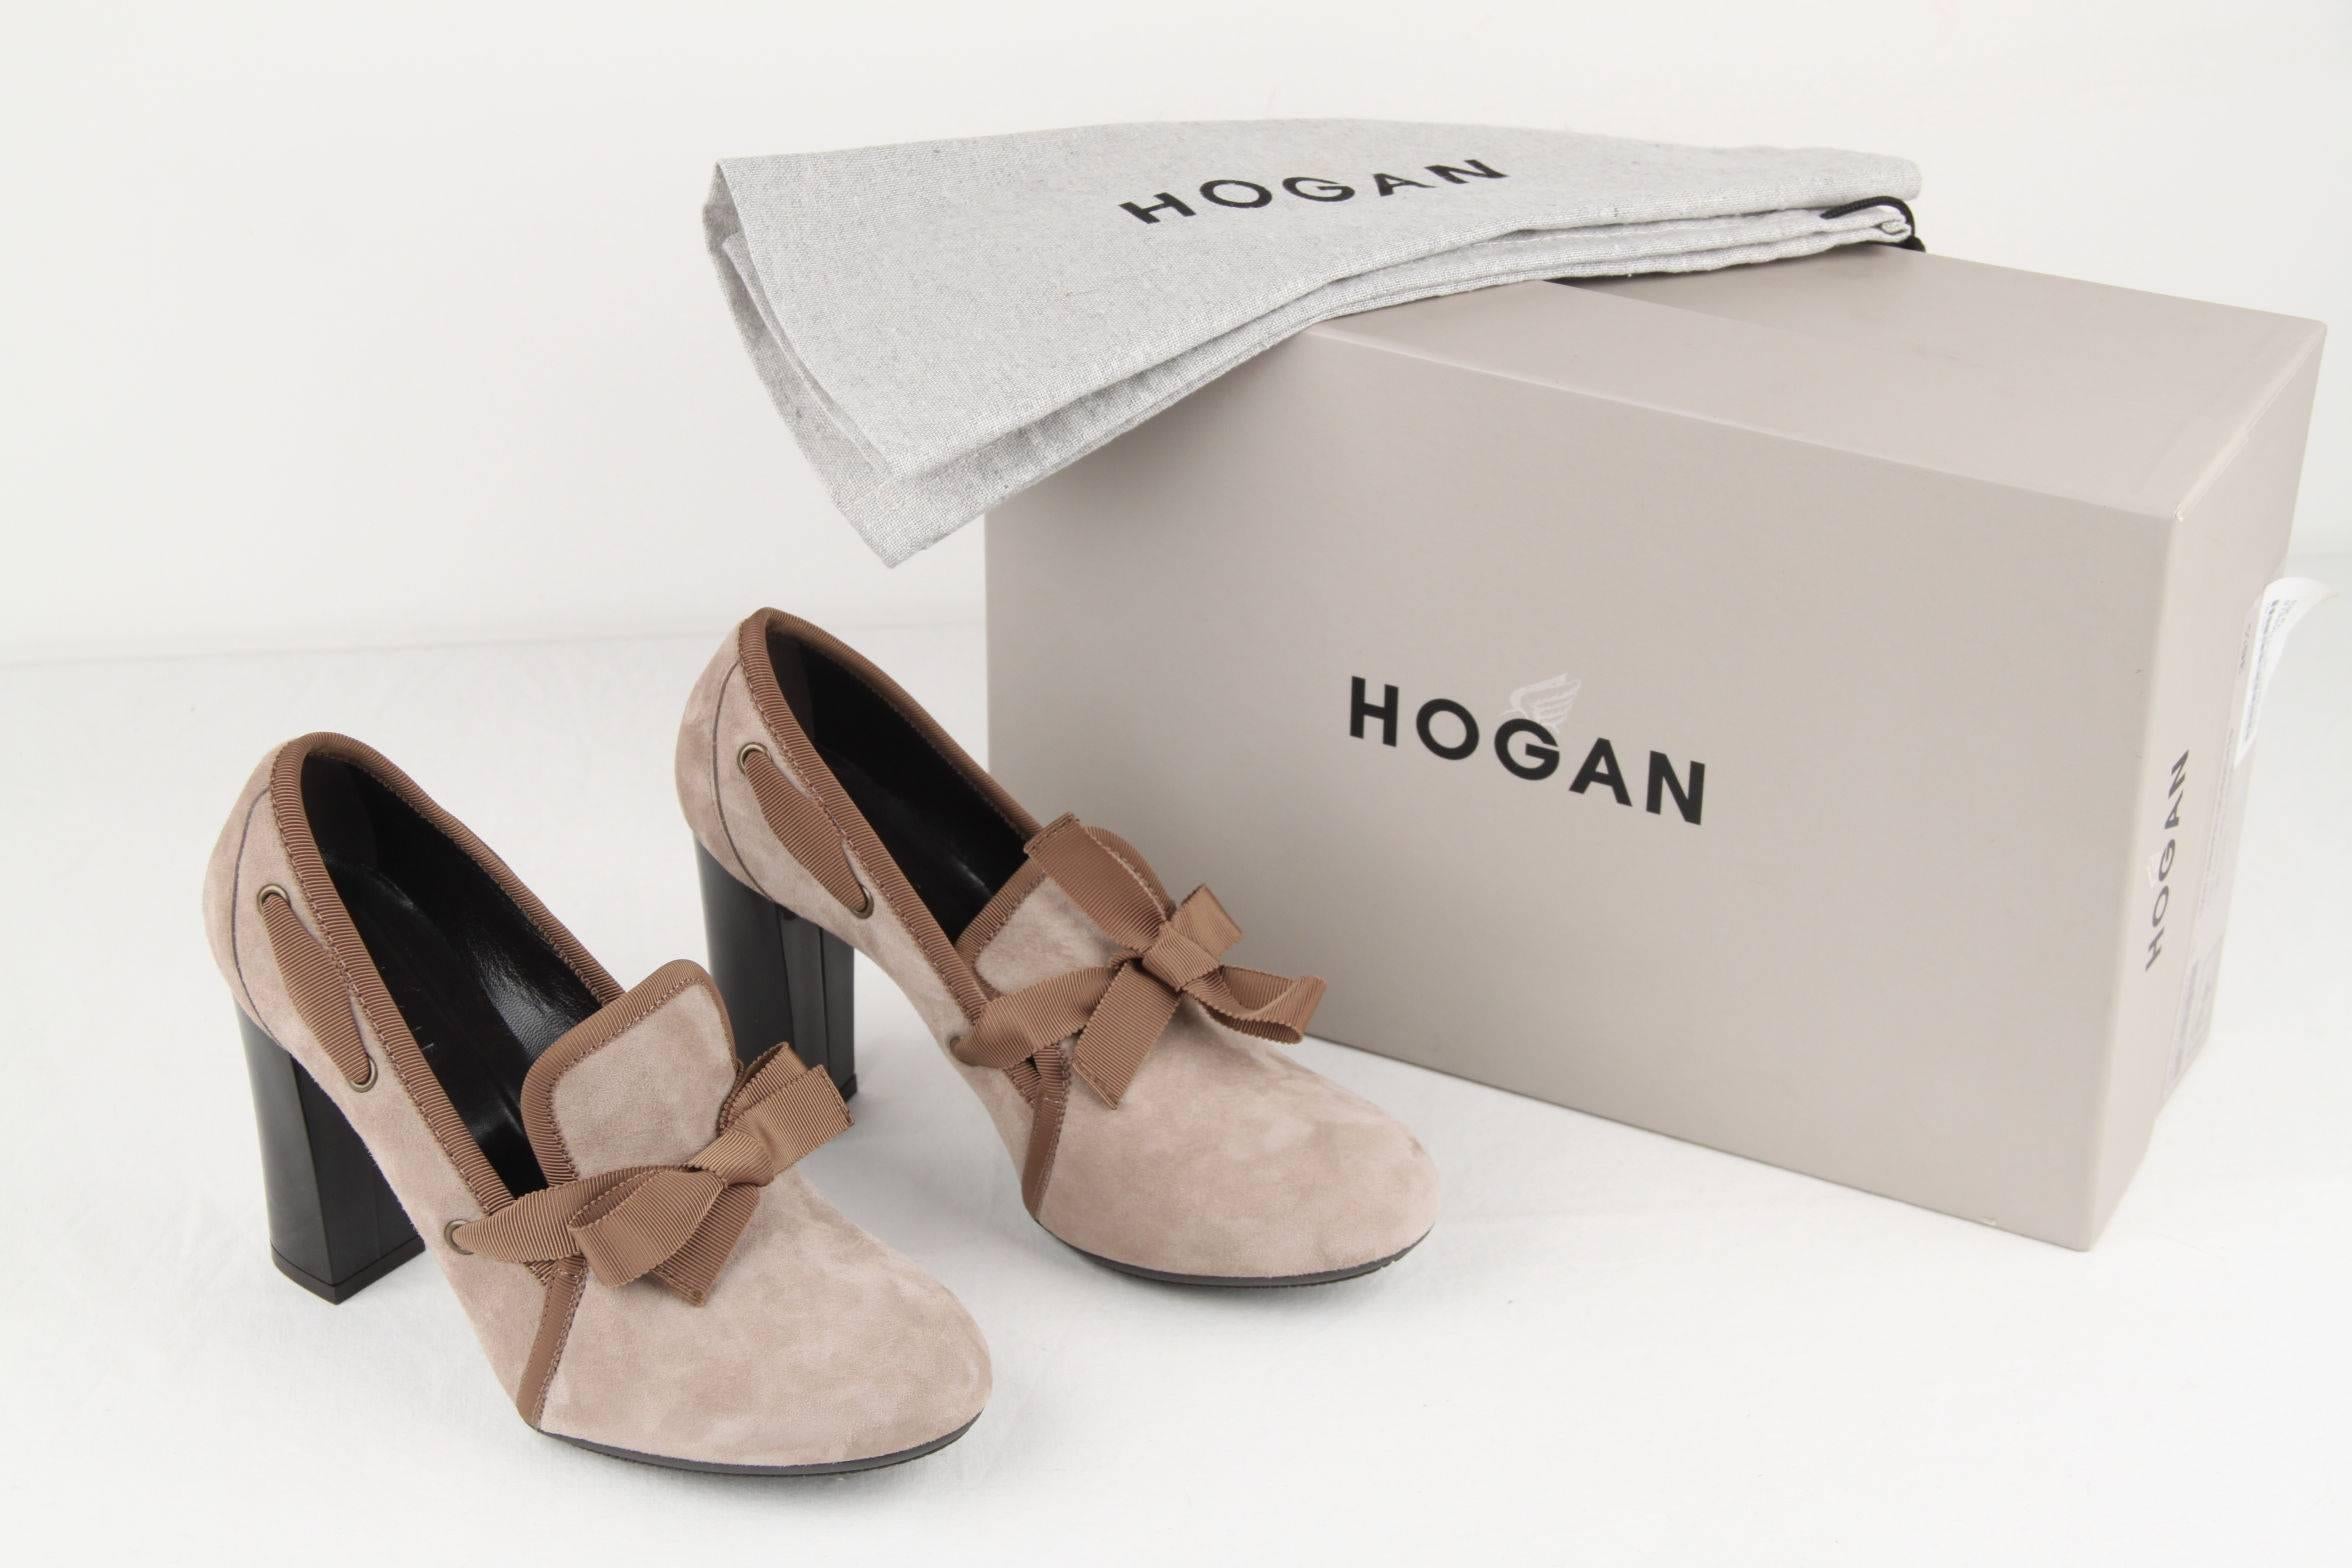 - HOGAN - Made in Italy
- Size 36 1/2 
- Round toeline 
- Gros-grain bow detailing and trim 
- Fabric / Material: Suede 
- Color / Effect: Taupe, Light Brown trim 
- Heel height: 4 inches - 10,2 cm 
- Width: 3 inches - 7,6 cm